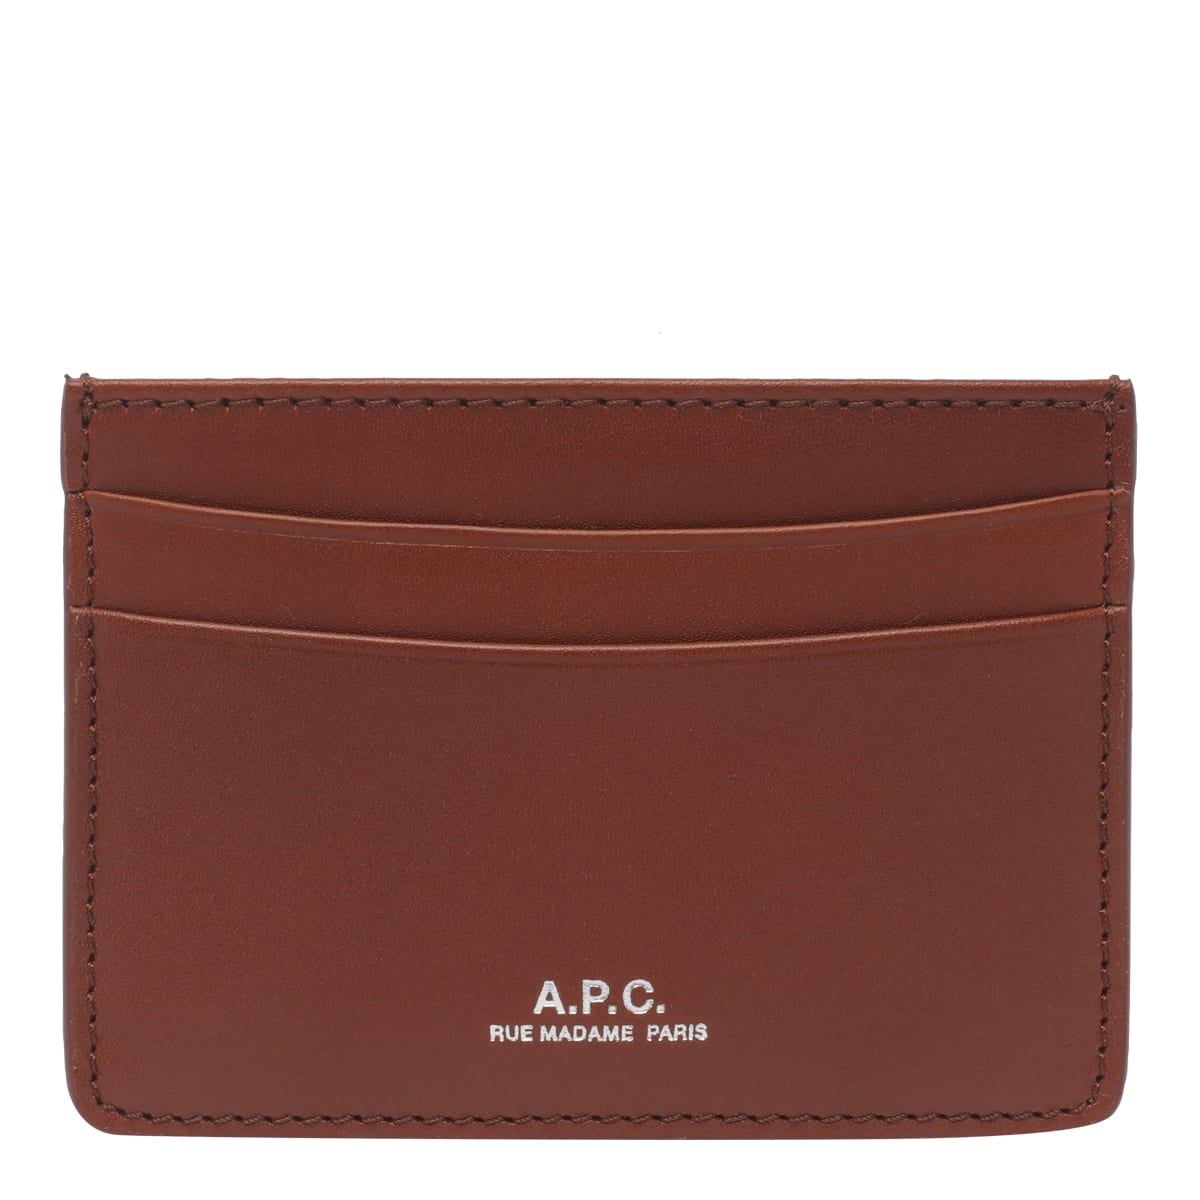 APC ANDRE CARDS HOLDER